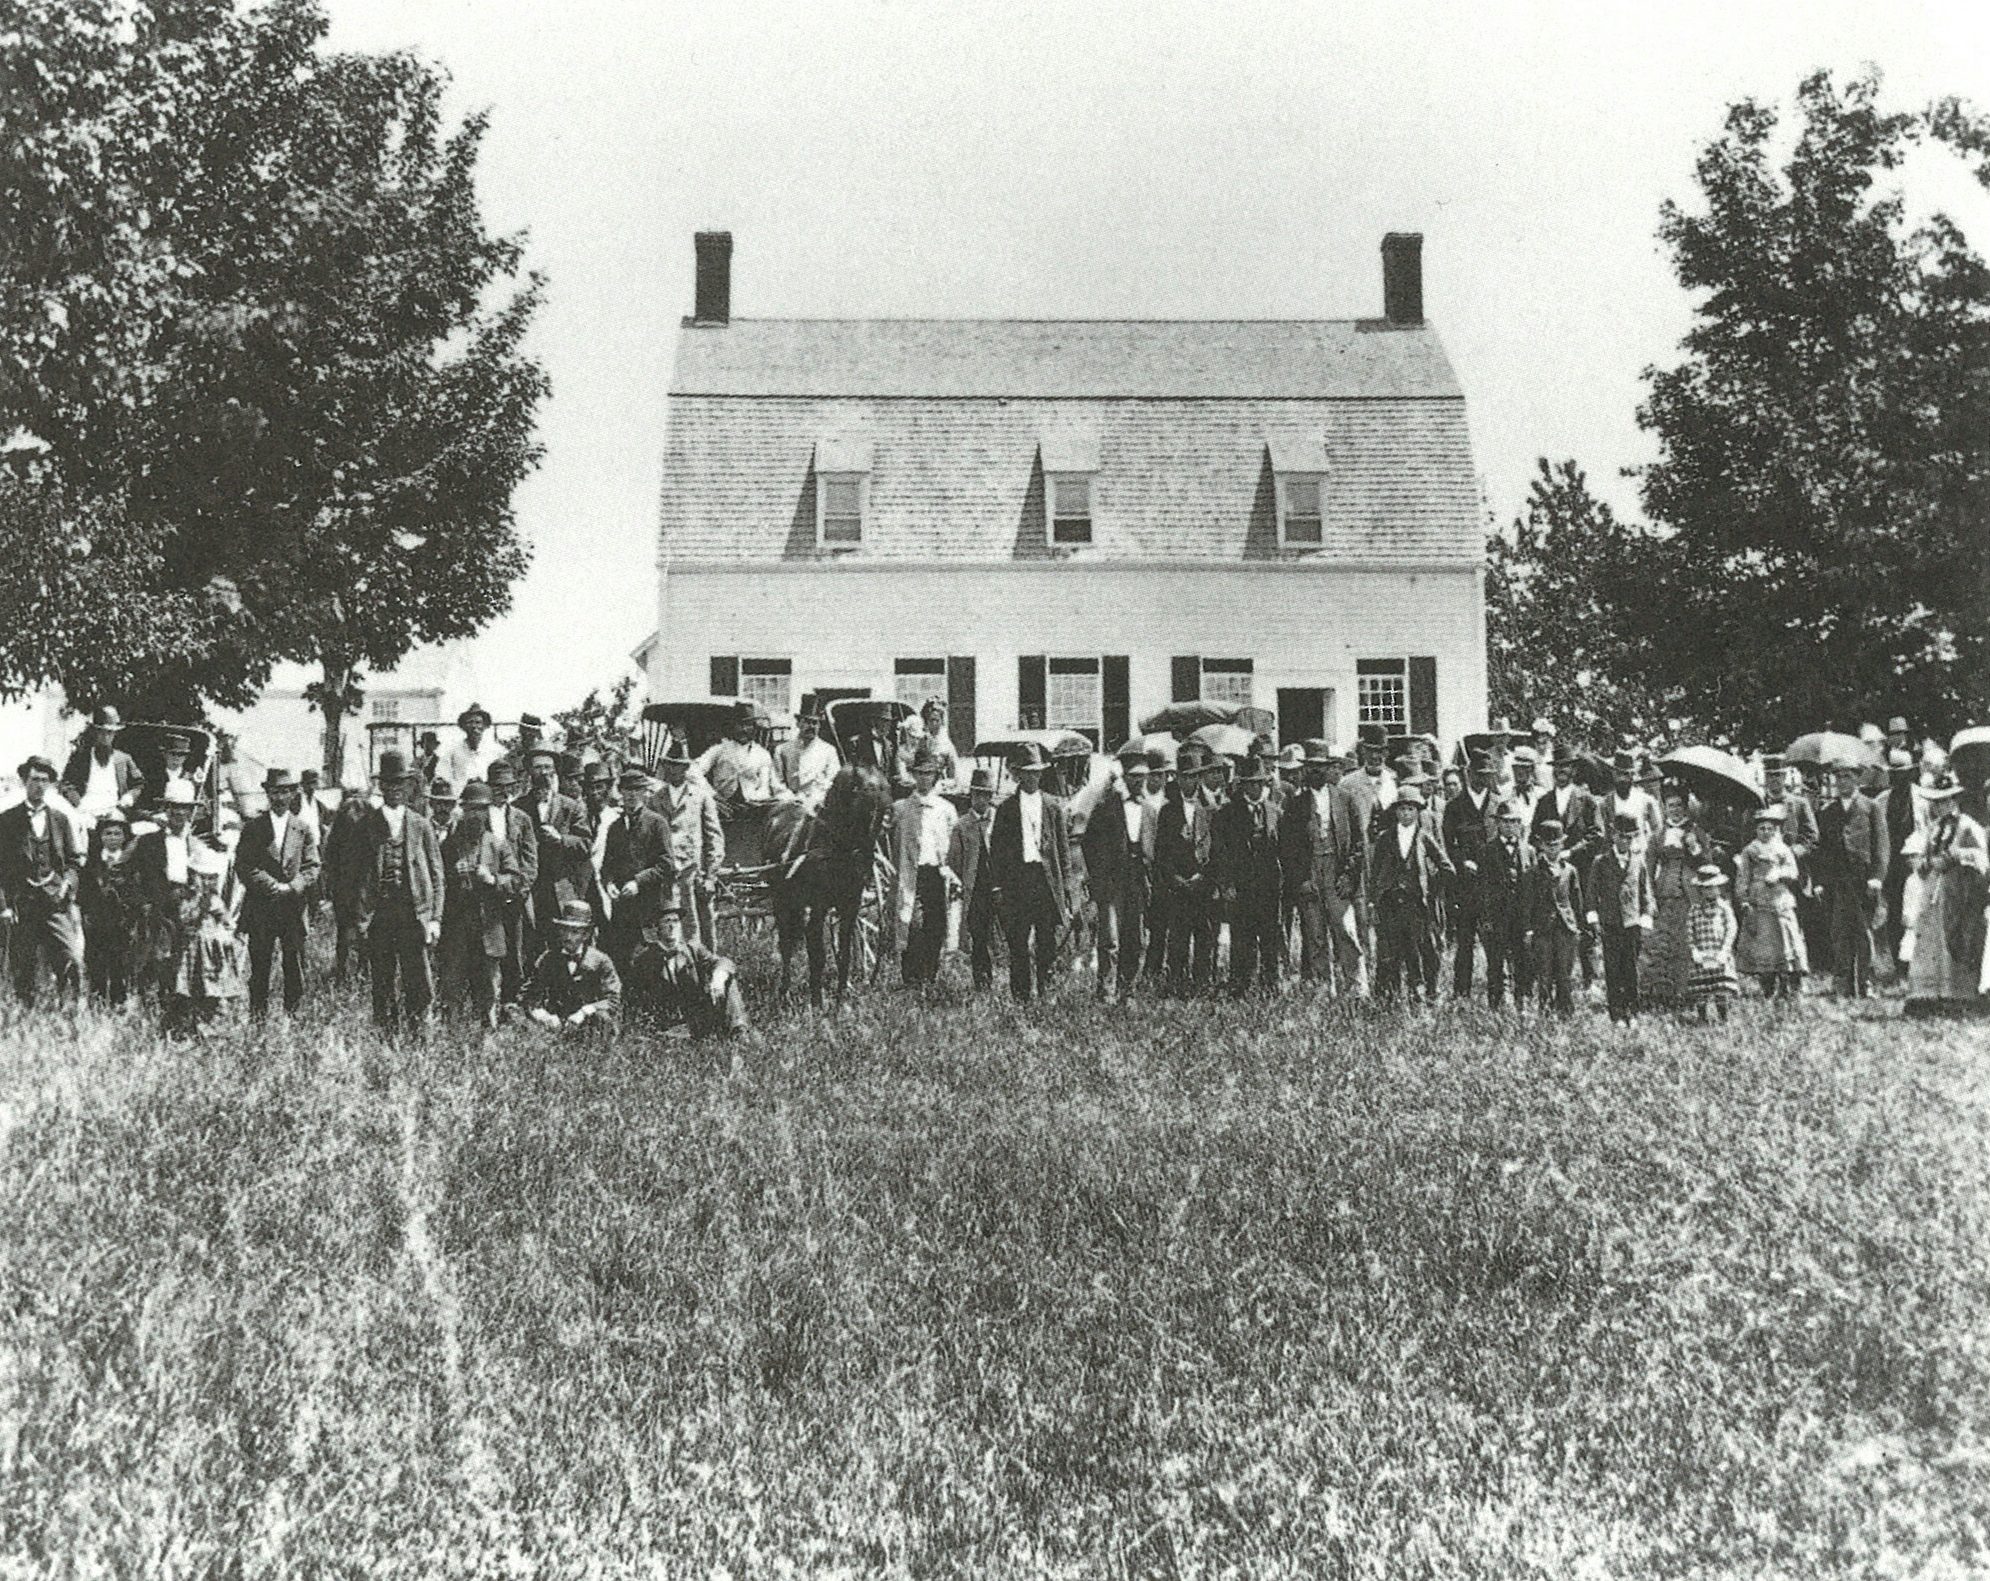 The Congregation of Strangers After Leaving the Church, June 30th 1878, Kimball Studio of Concord, NH.